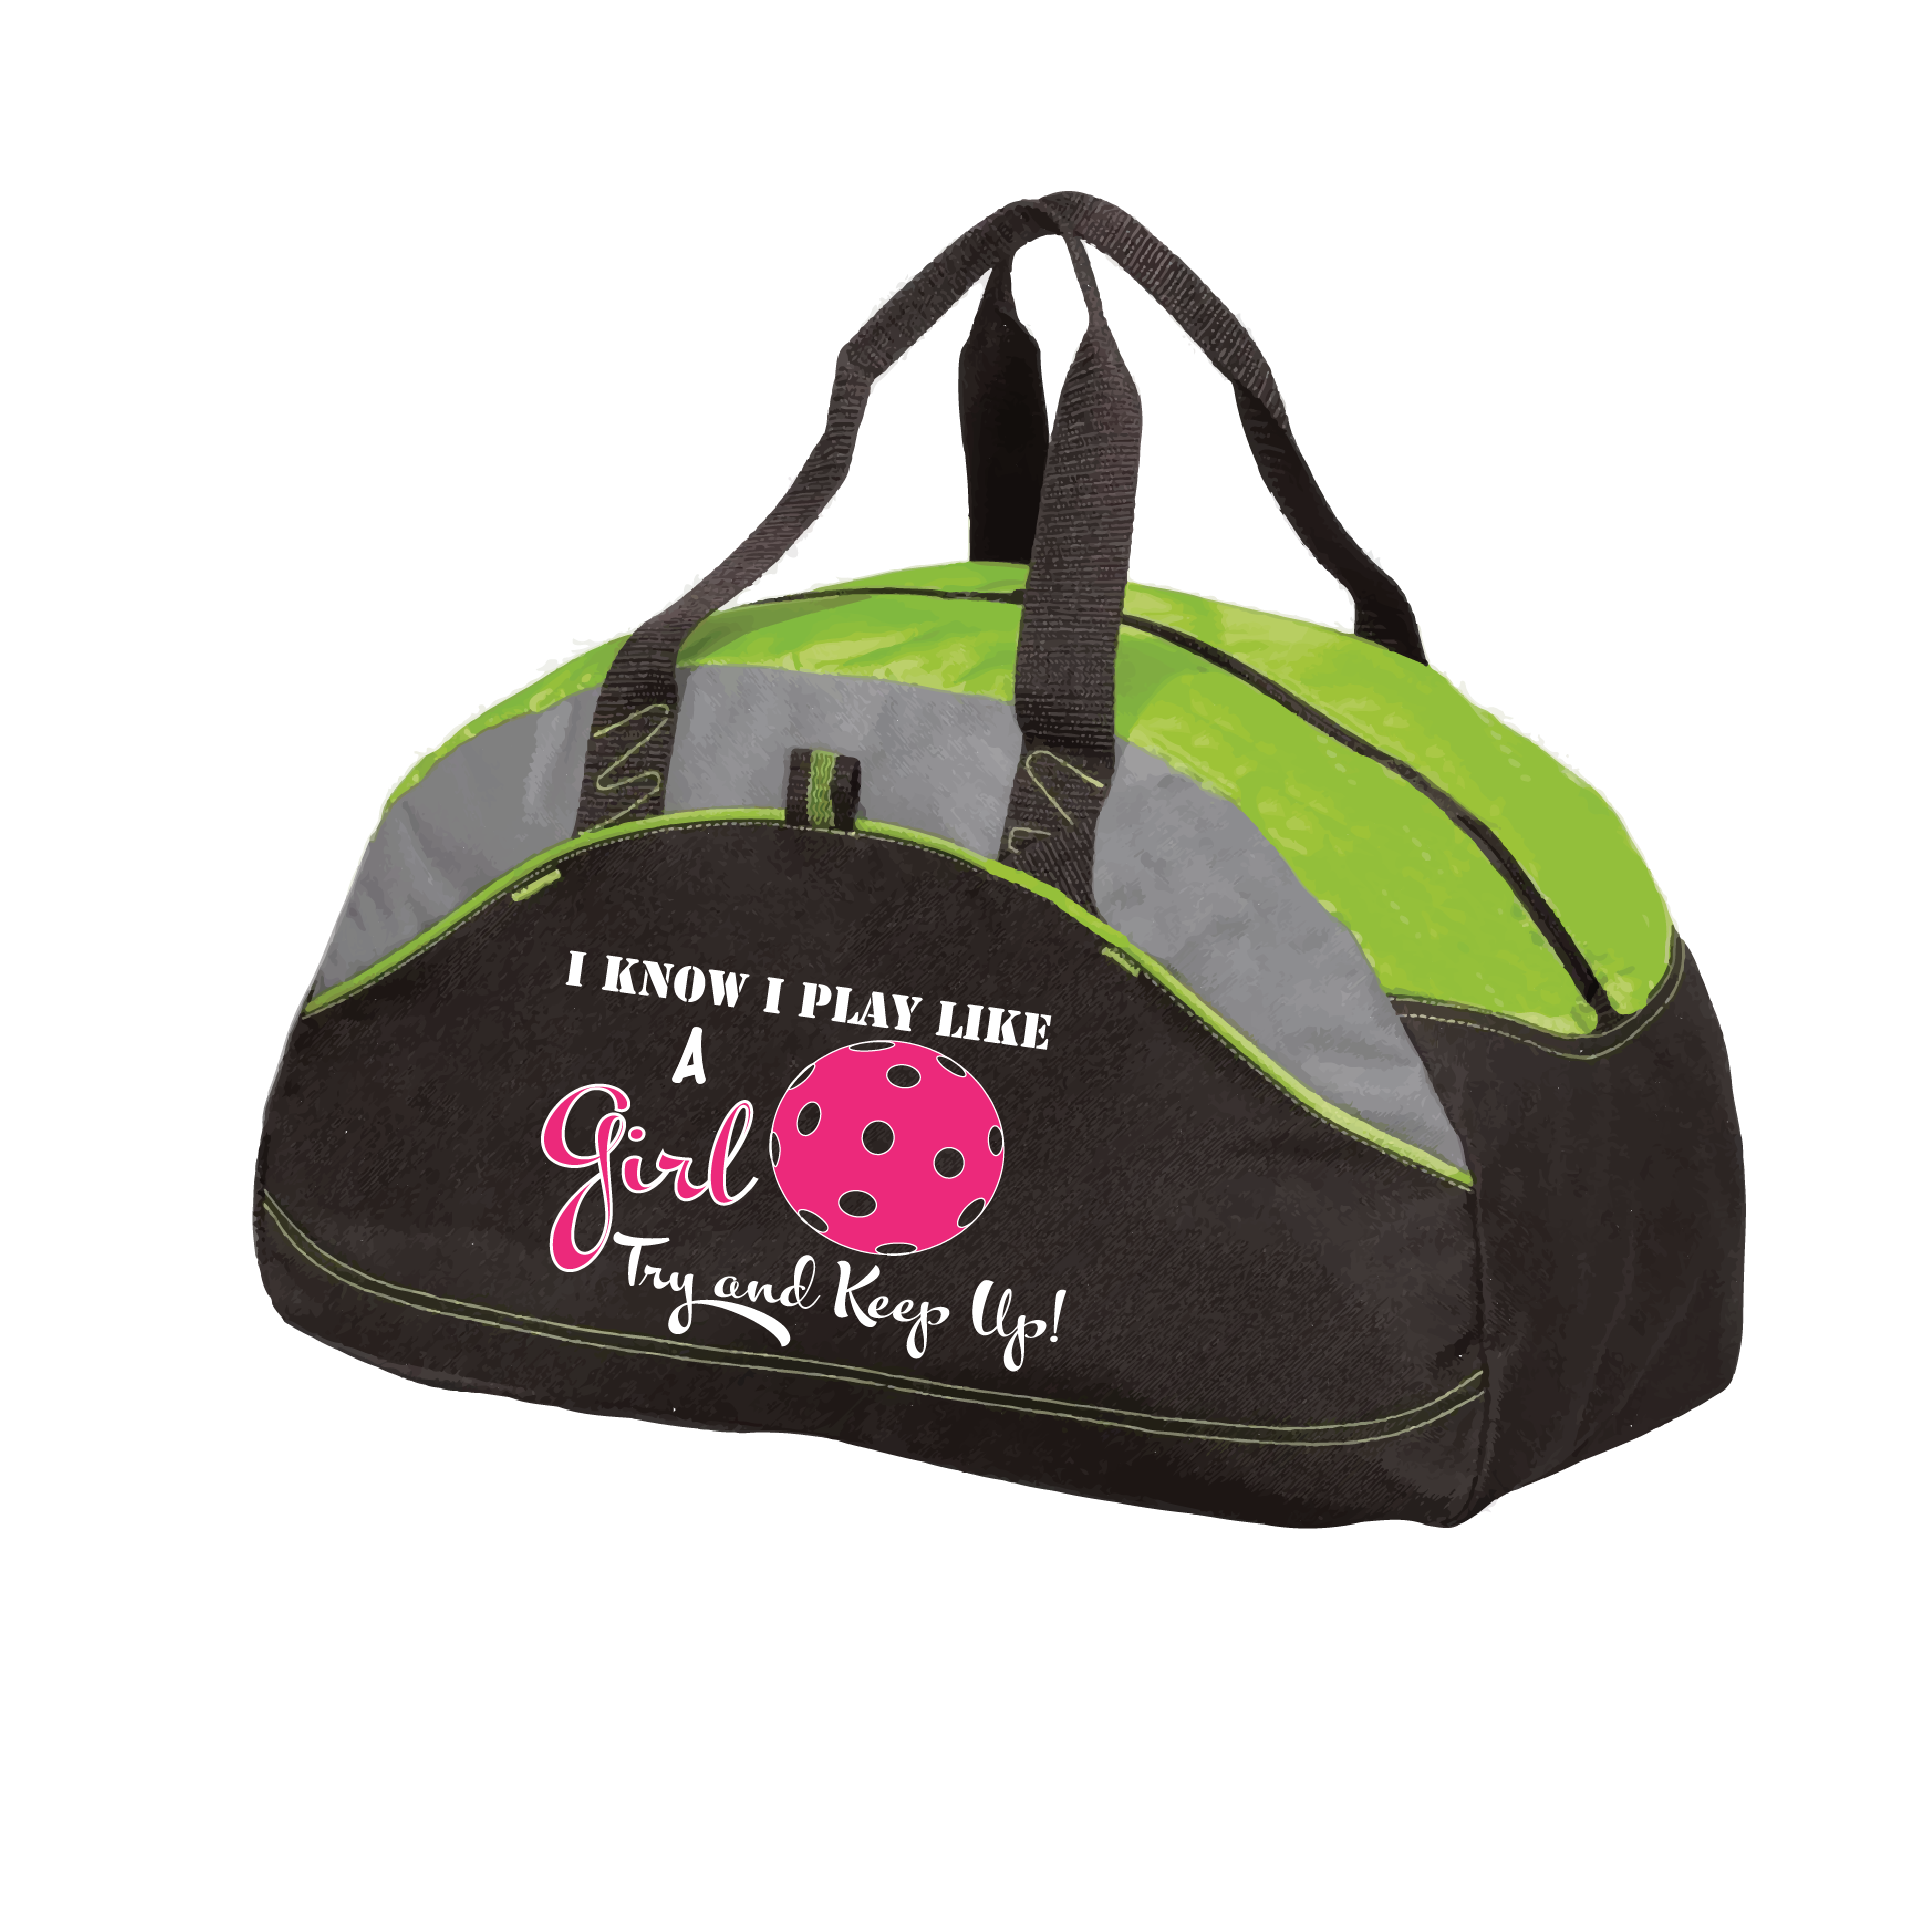 Pickleball Bag Design: I know I Play Like a Girl, Try to Keep Up  Carry your gear in comfort and style. This fun pickleball duffel bag is the perfect accessory for all pickleball players needing to keep their gear in one place. This medium sized duffel tote is ideal for all your pickleball activities. The large center compartment allows for plenty of space and the mesh end pocket is perfect for holding a water bottle. 